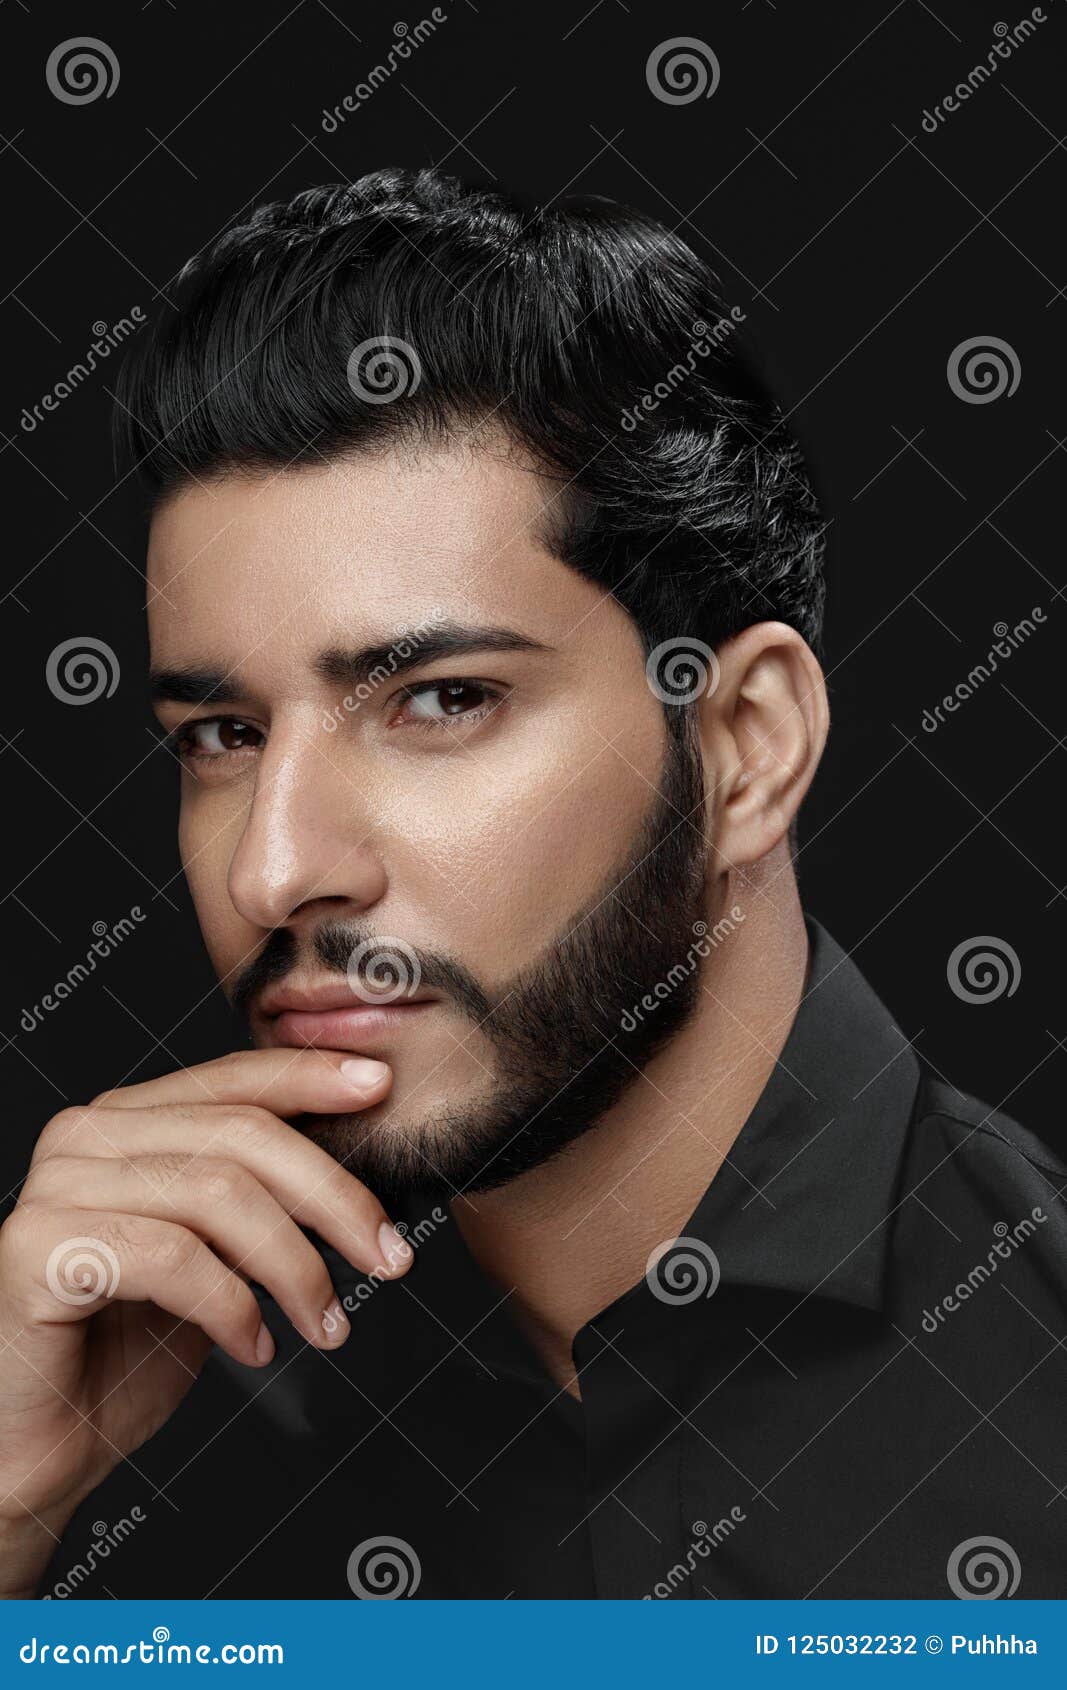 Facial Hair Male Face Image  Photo Free Trial  Bigstock